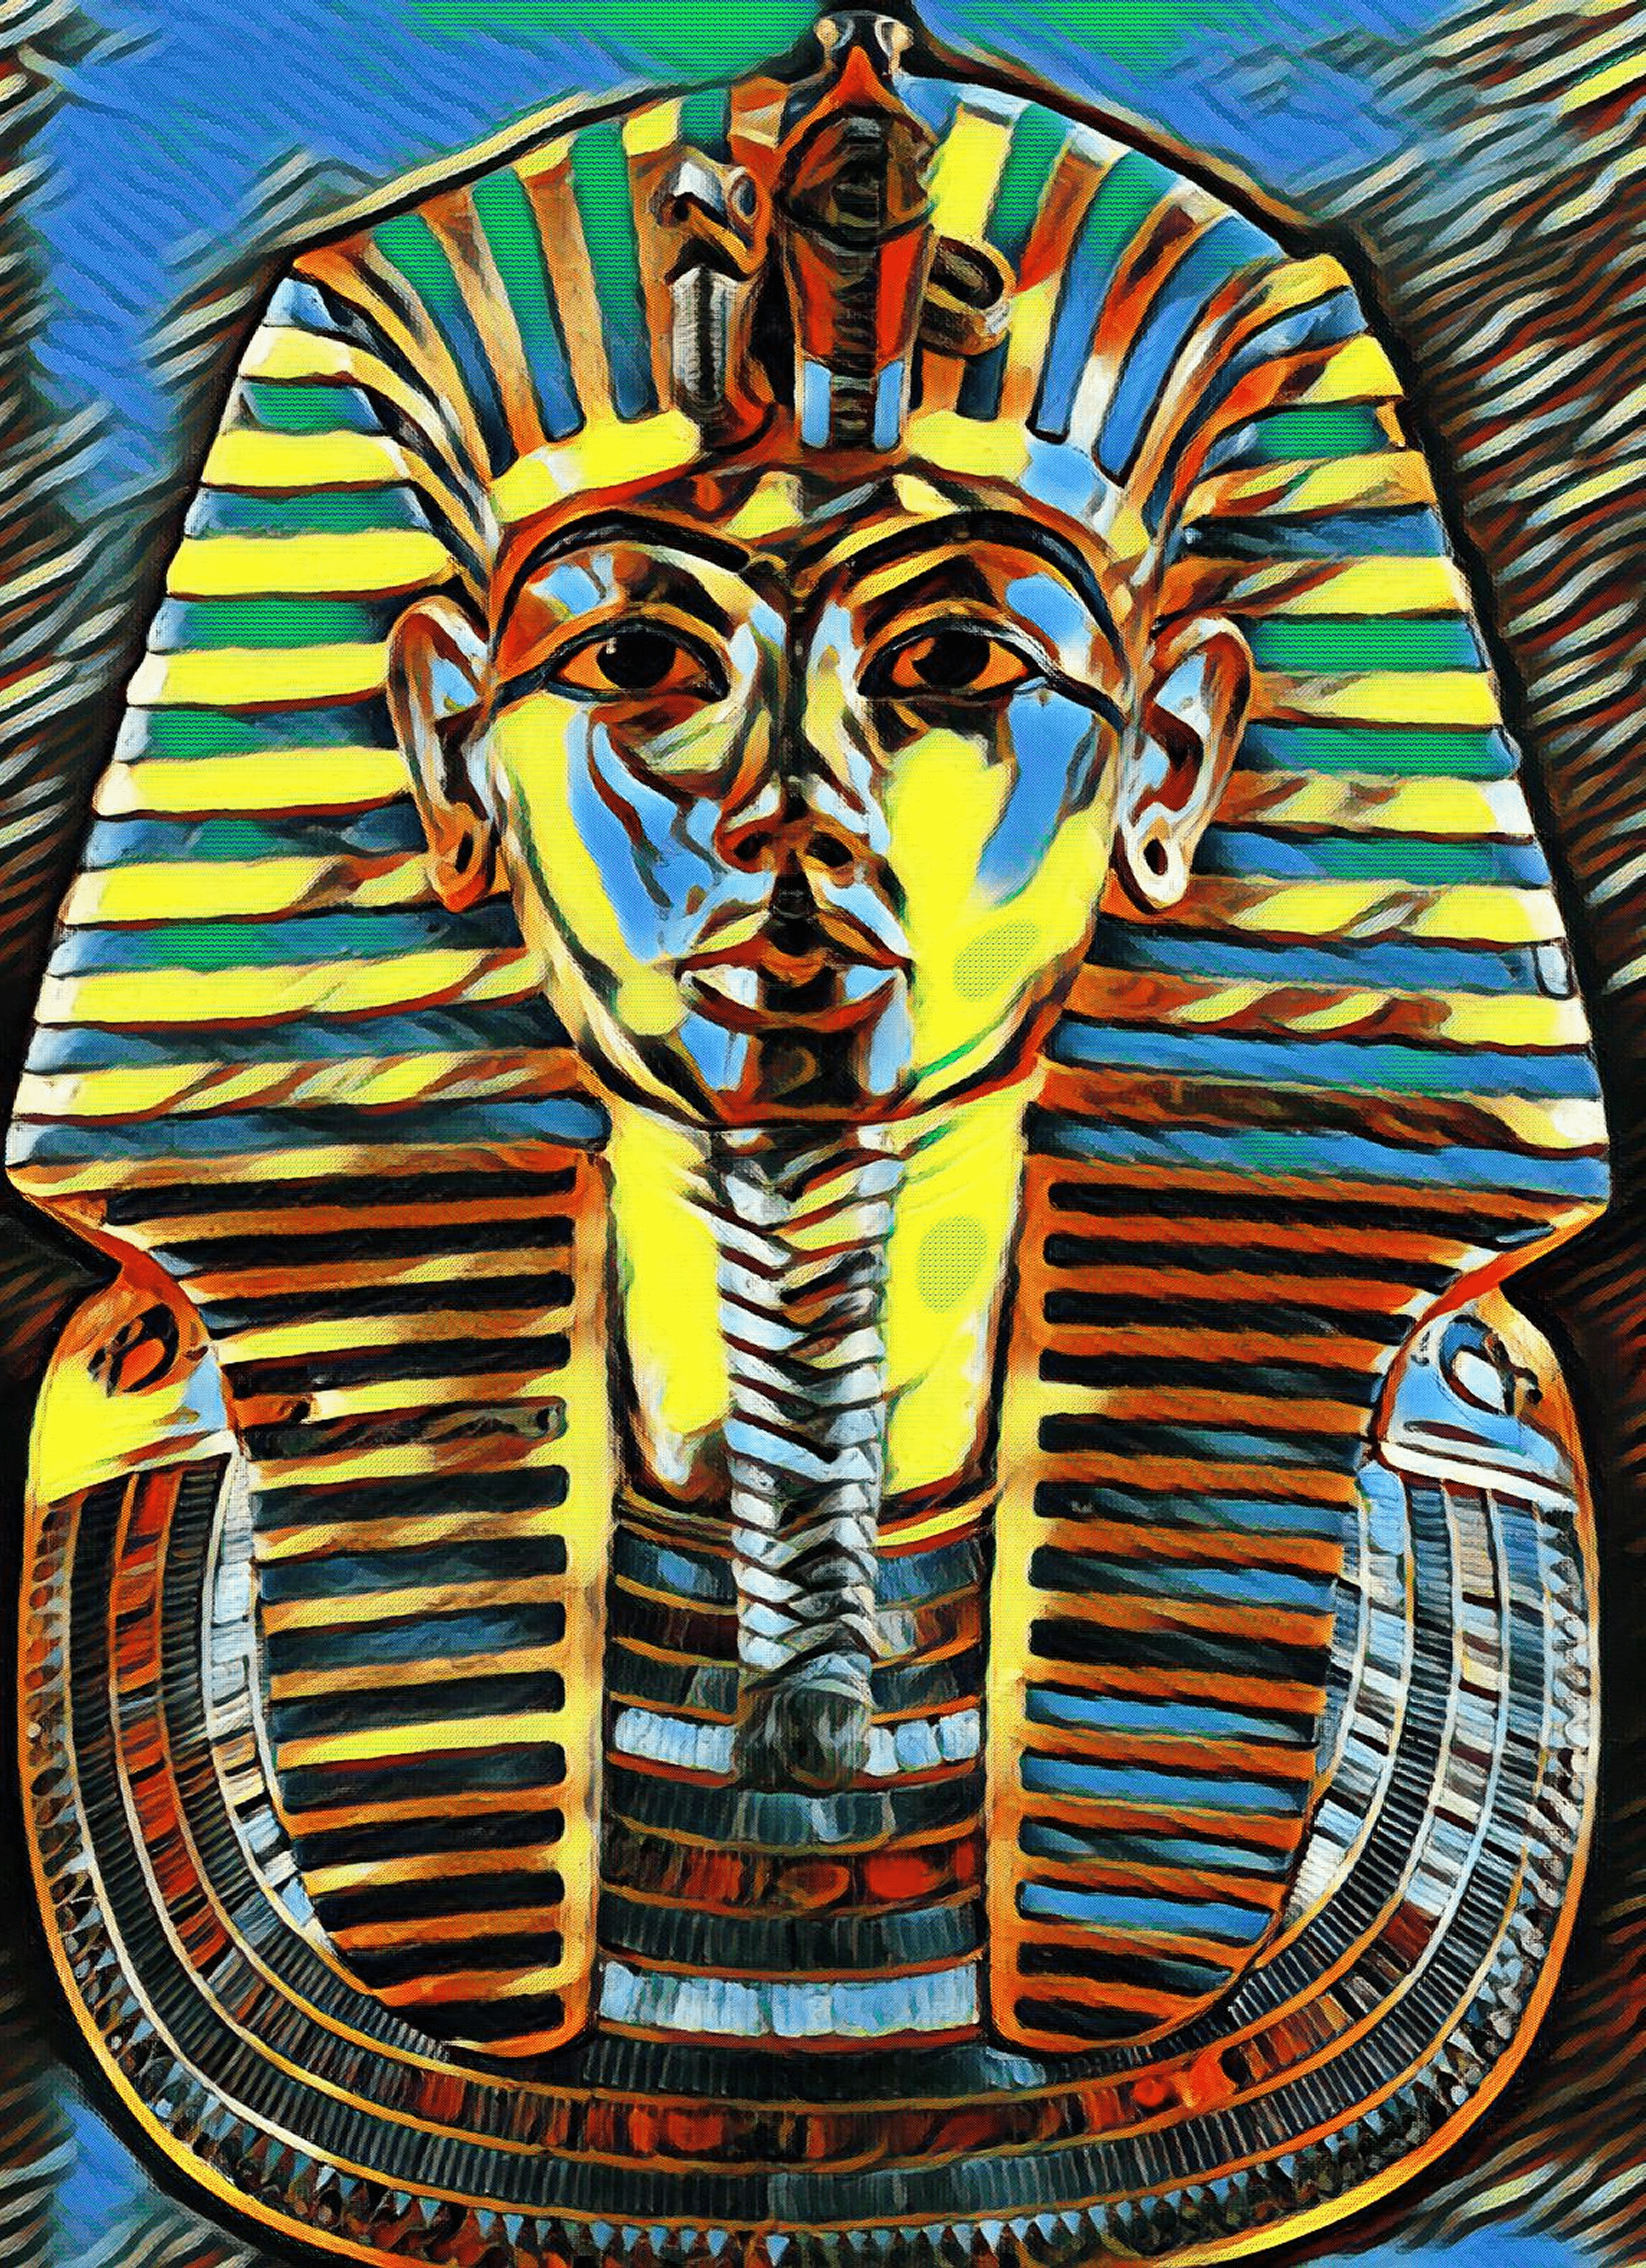 King Tut Pharaoh NFT Pop Art NFT by SOLLOG Limited Minting 10 Copies on Polygon Opensea